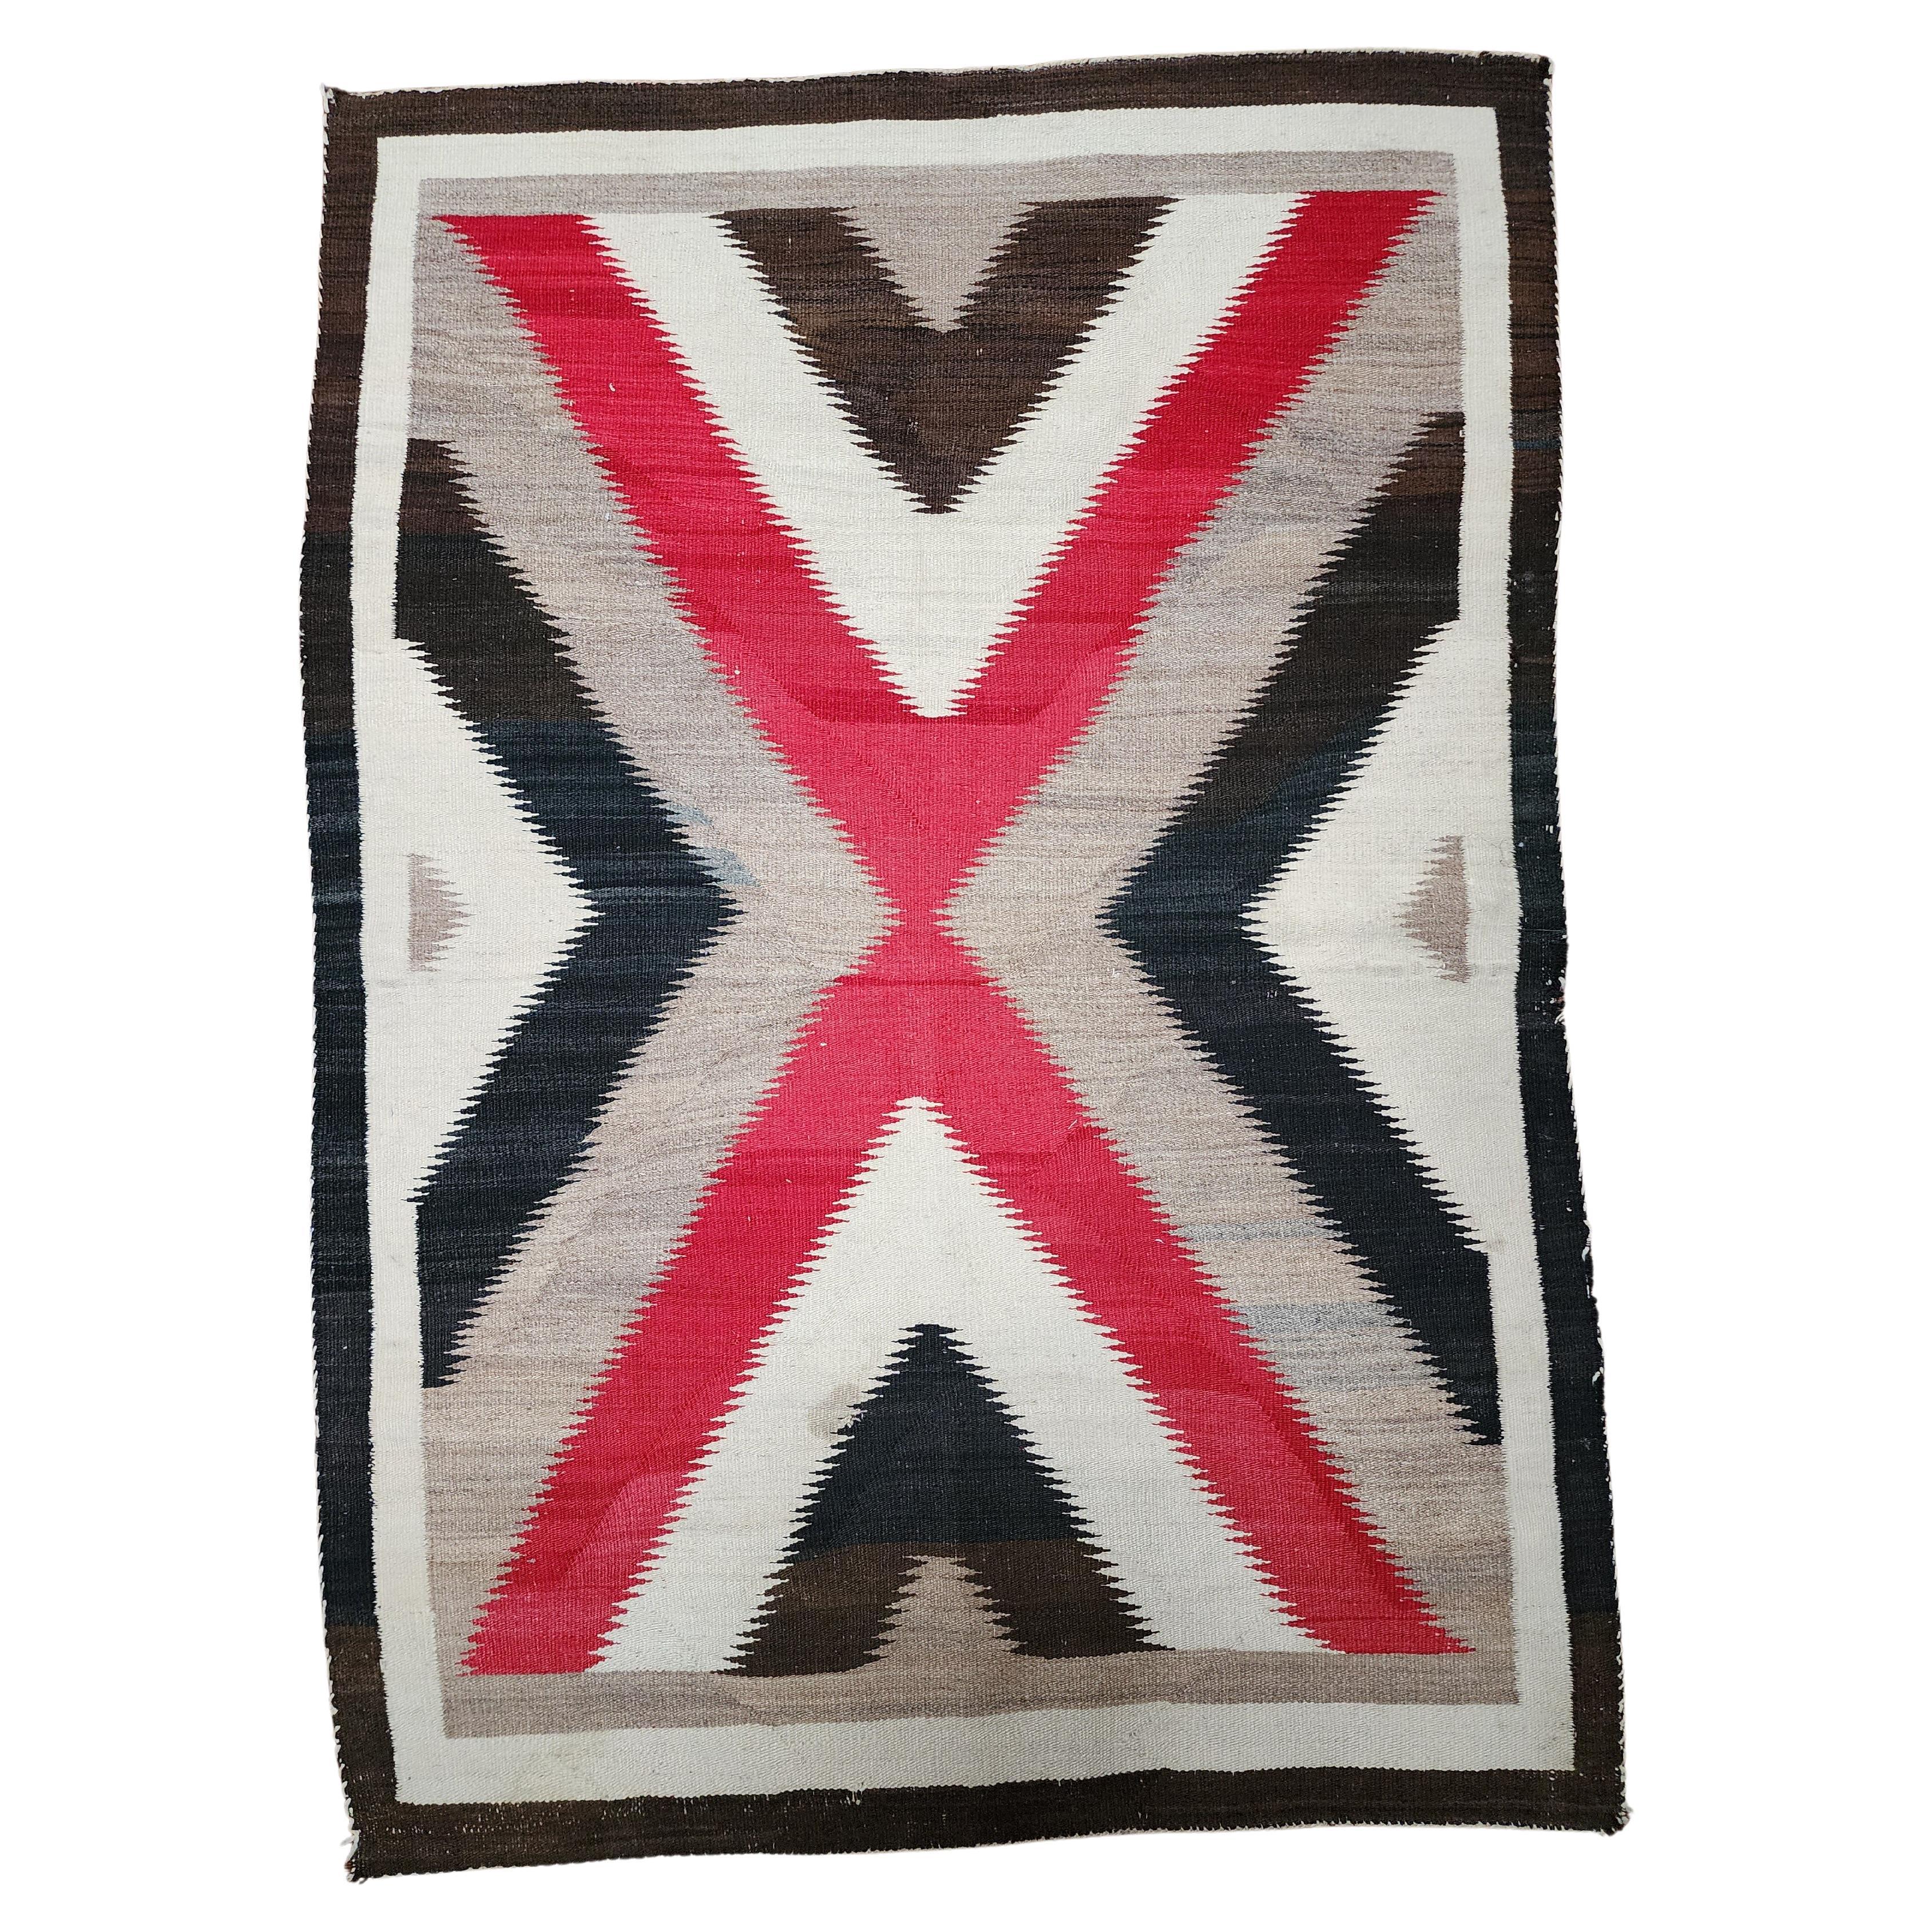 Circa 1890 Navajo weaving with a very elegant and modern design. Nice mottling of the natural colors, especially in the reds. This is a very bold weaving, likely a double saddle blanket. The gray threads seen in the neutral grounds are not a repair